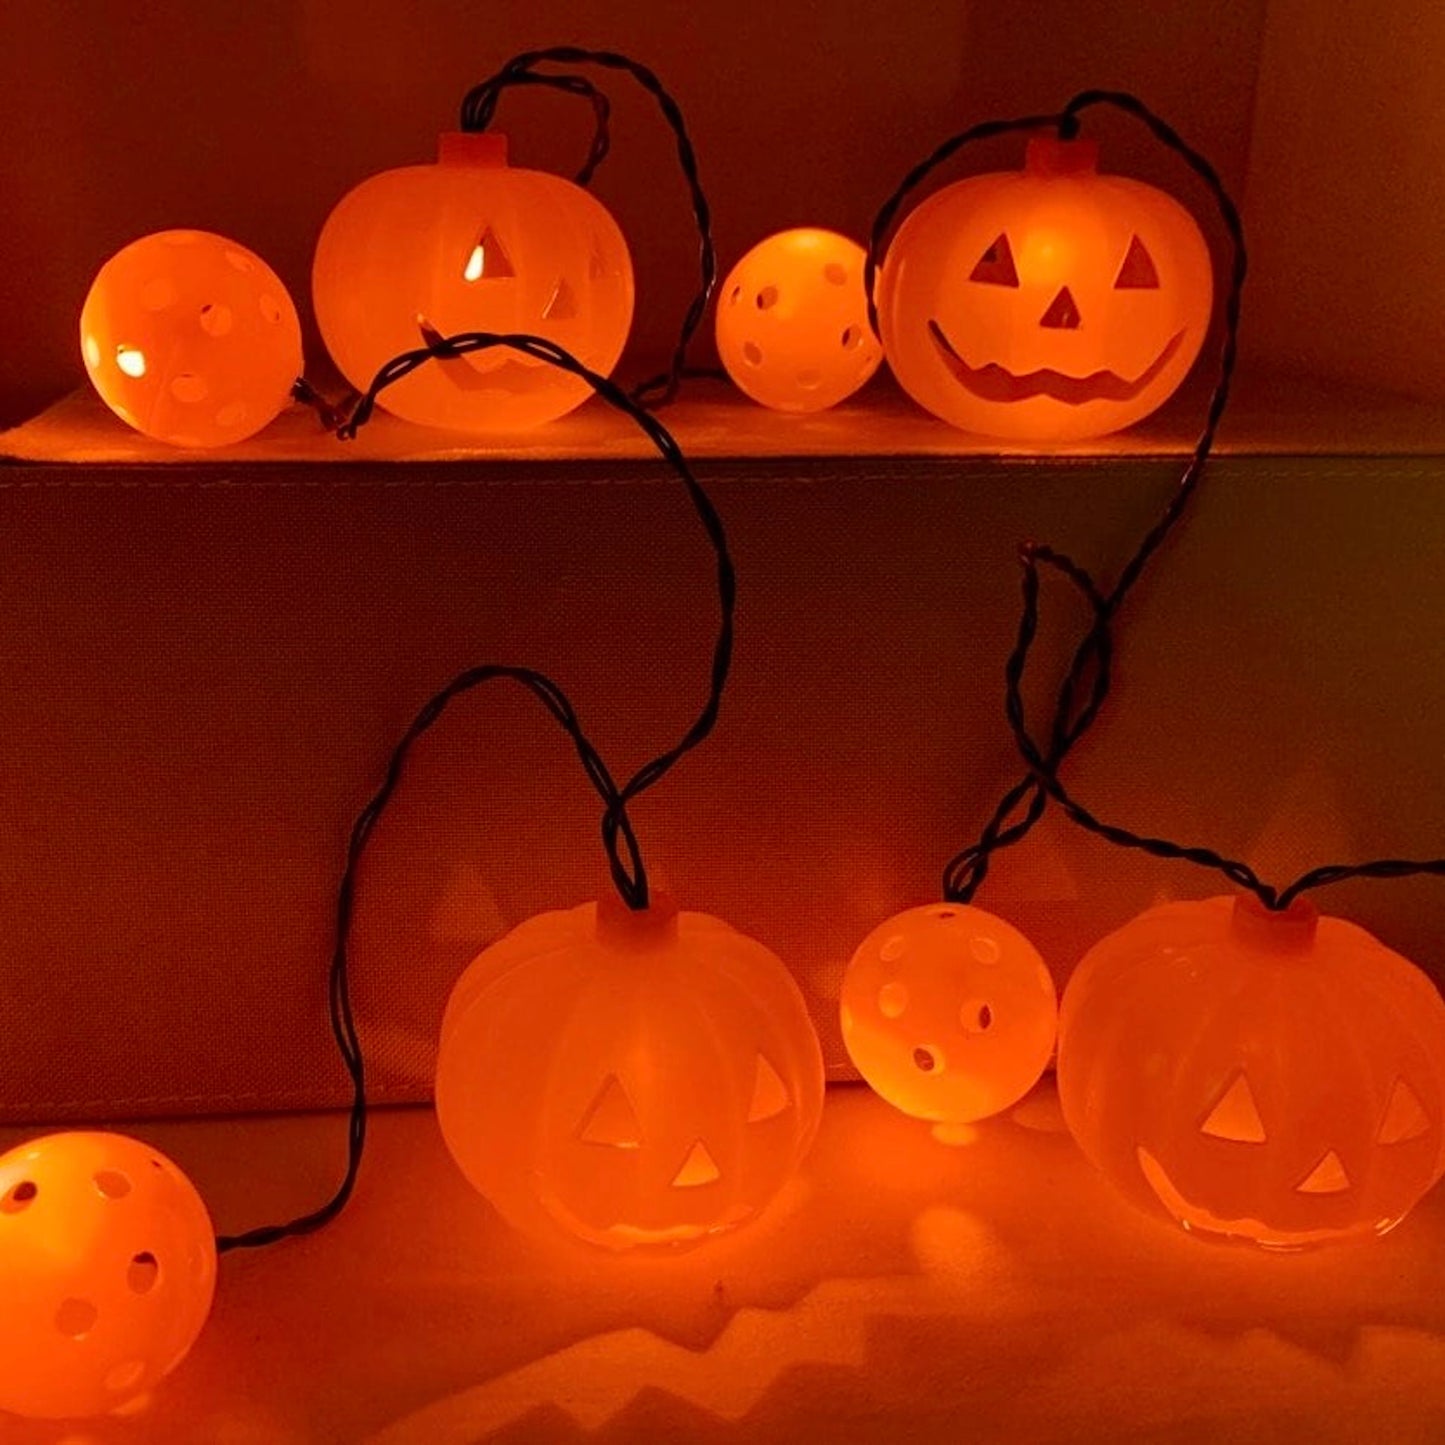 Pickleball Halloween Lights  These SCARY Halloween lights are now classically decorated with pumpkins and orange mini pickleballs!! This will be the final touches to anyone's Halloween decor!!